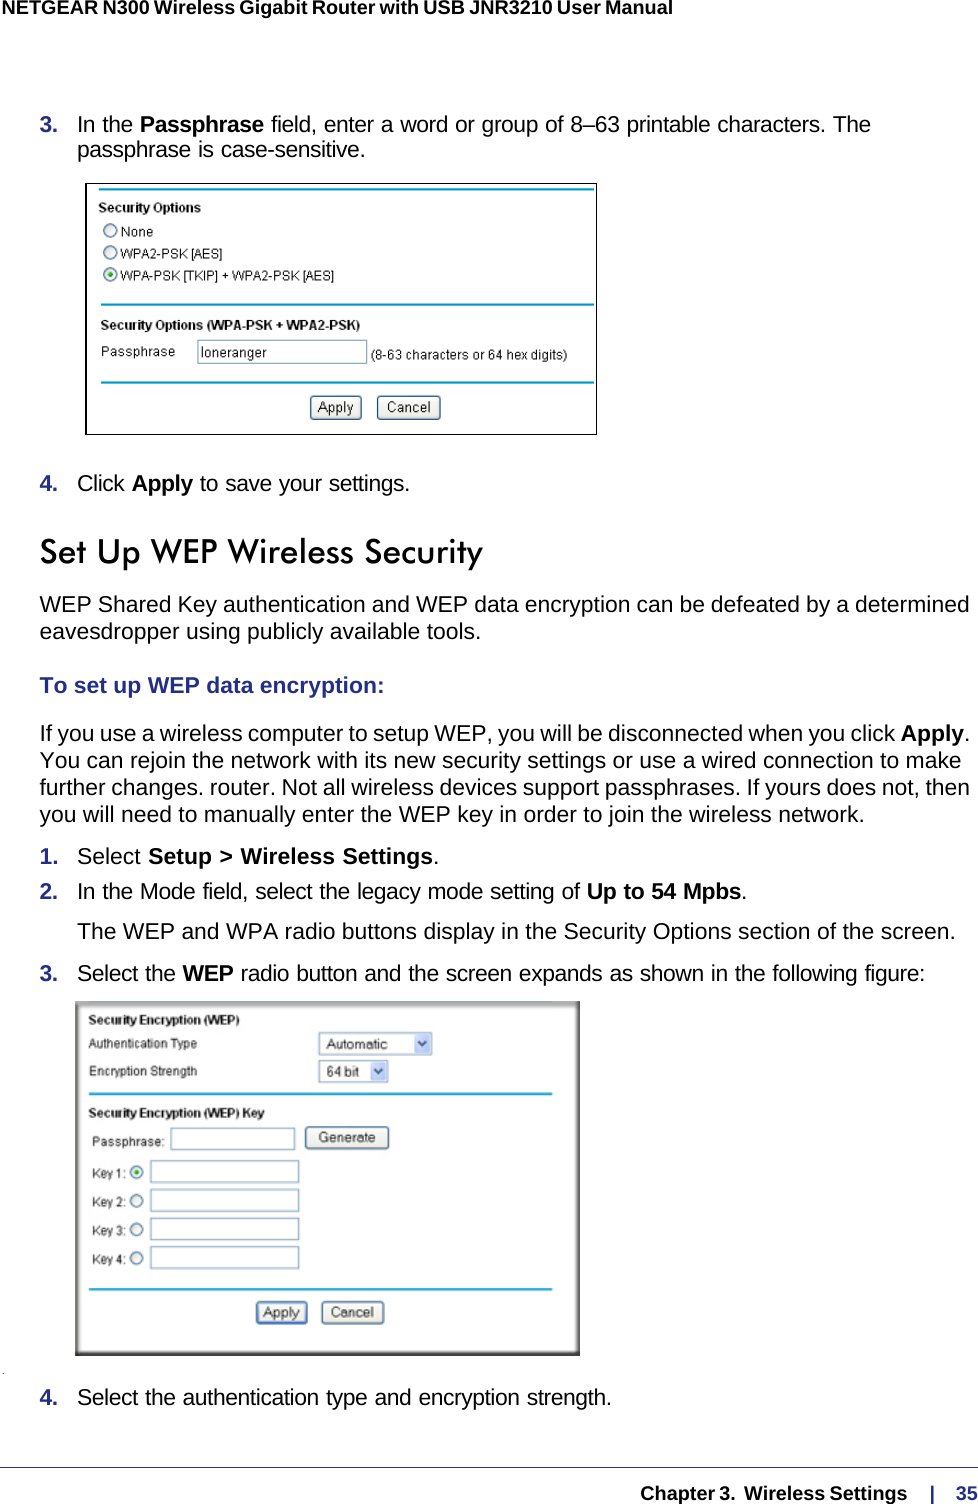   Chapter 3.  Wireless Settings     |    35NETGEAR N300 Wireless Gigabit Router with USB JNR3210 User Manual 3.  In the Passphrase field, enter a word or group of 8–63 printable characters. The passphrase is case-sensitive.4.  Click Apply to save your settings.Set Up WEP Wireless SecurityWEP Shared Key authentication and WEP data encryption can be defeated by a determined eavesdropper using publicly available tools.To set up WEP data encryption:If you use a wireless computer to setup WEP, you will be disconnected when you click Apply. You can rejoin the network with its new security settings or use a wired connection to make further changes. router. Not all wireless devices support passphrases. If yours does not, then you will need to manually enter the WEP key in order to join the wireless network.1.  Select Setup &gt; Wireless Settings.2.  In the Mode field, select the legacy mode setting of Up to 54 Mpbs.The WEP and WPA radio buttons display in the Security Options section of the screen. 3.  Select the WEP radio button and the screen expands as shown in the following figure:.4.  Select the authentication type and encryption strength.